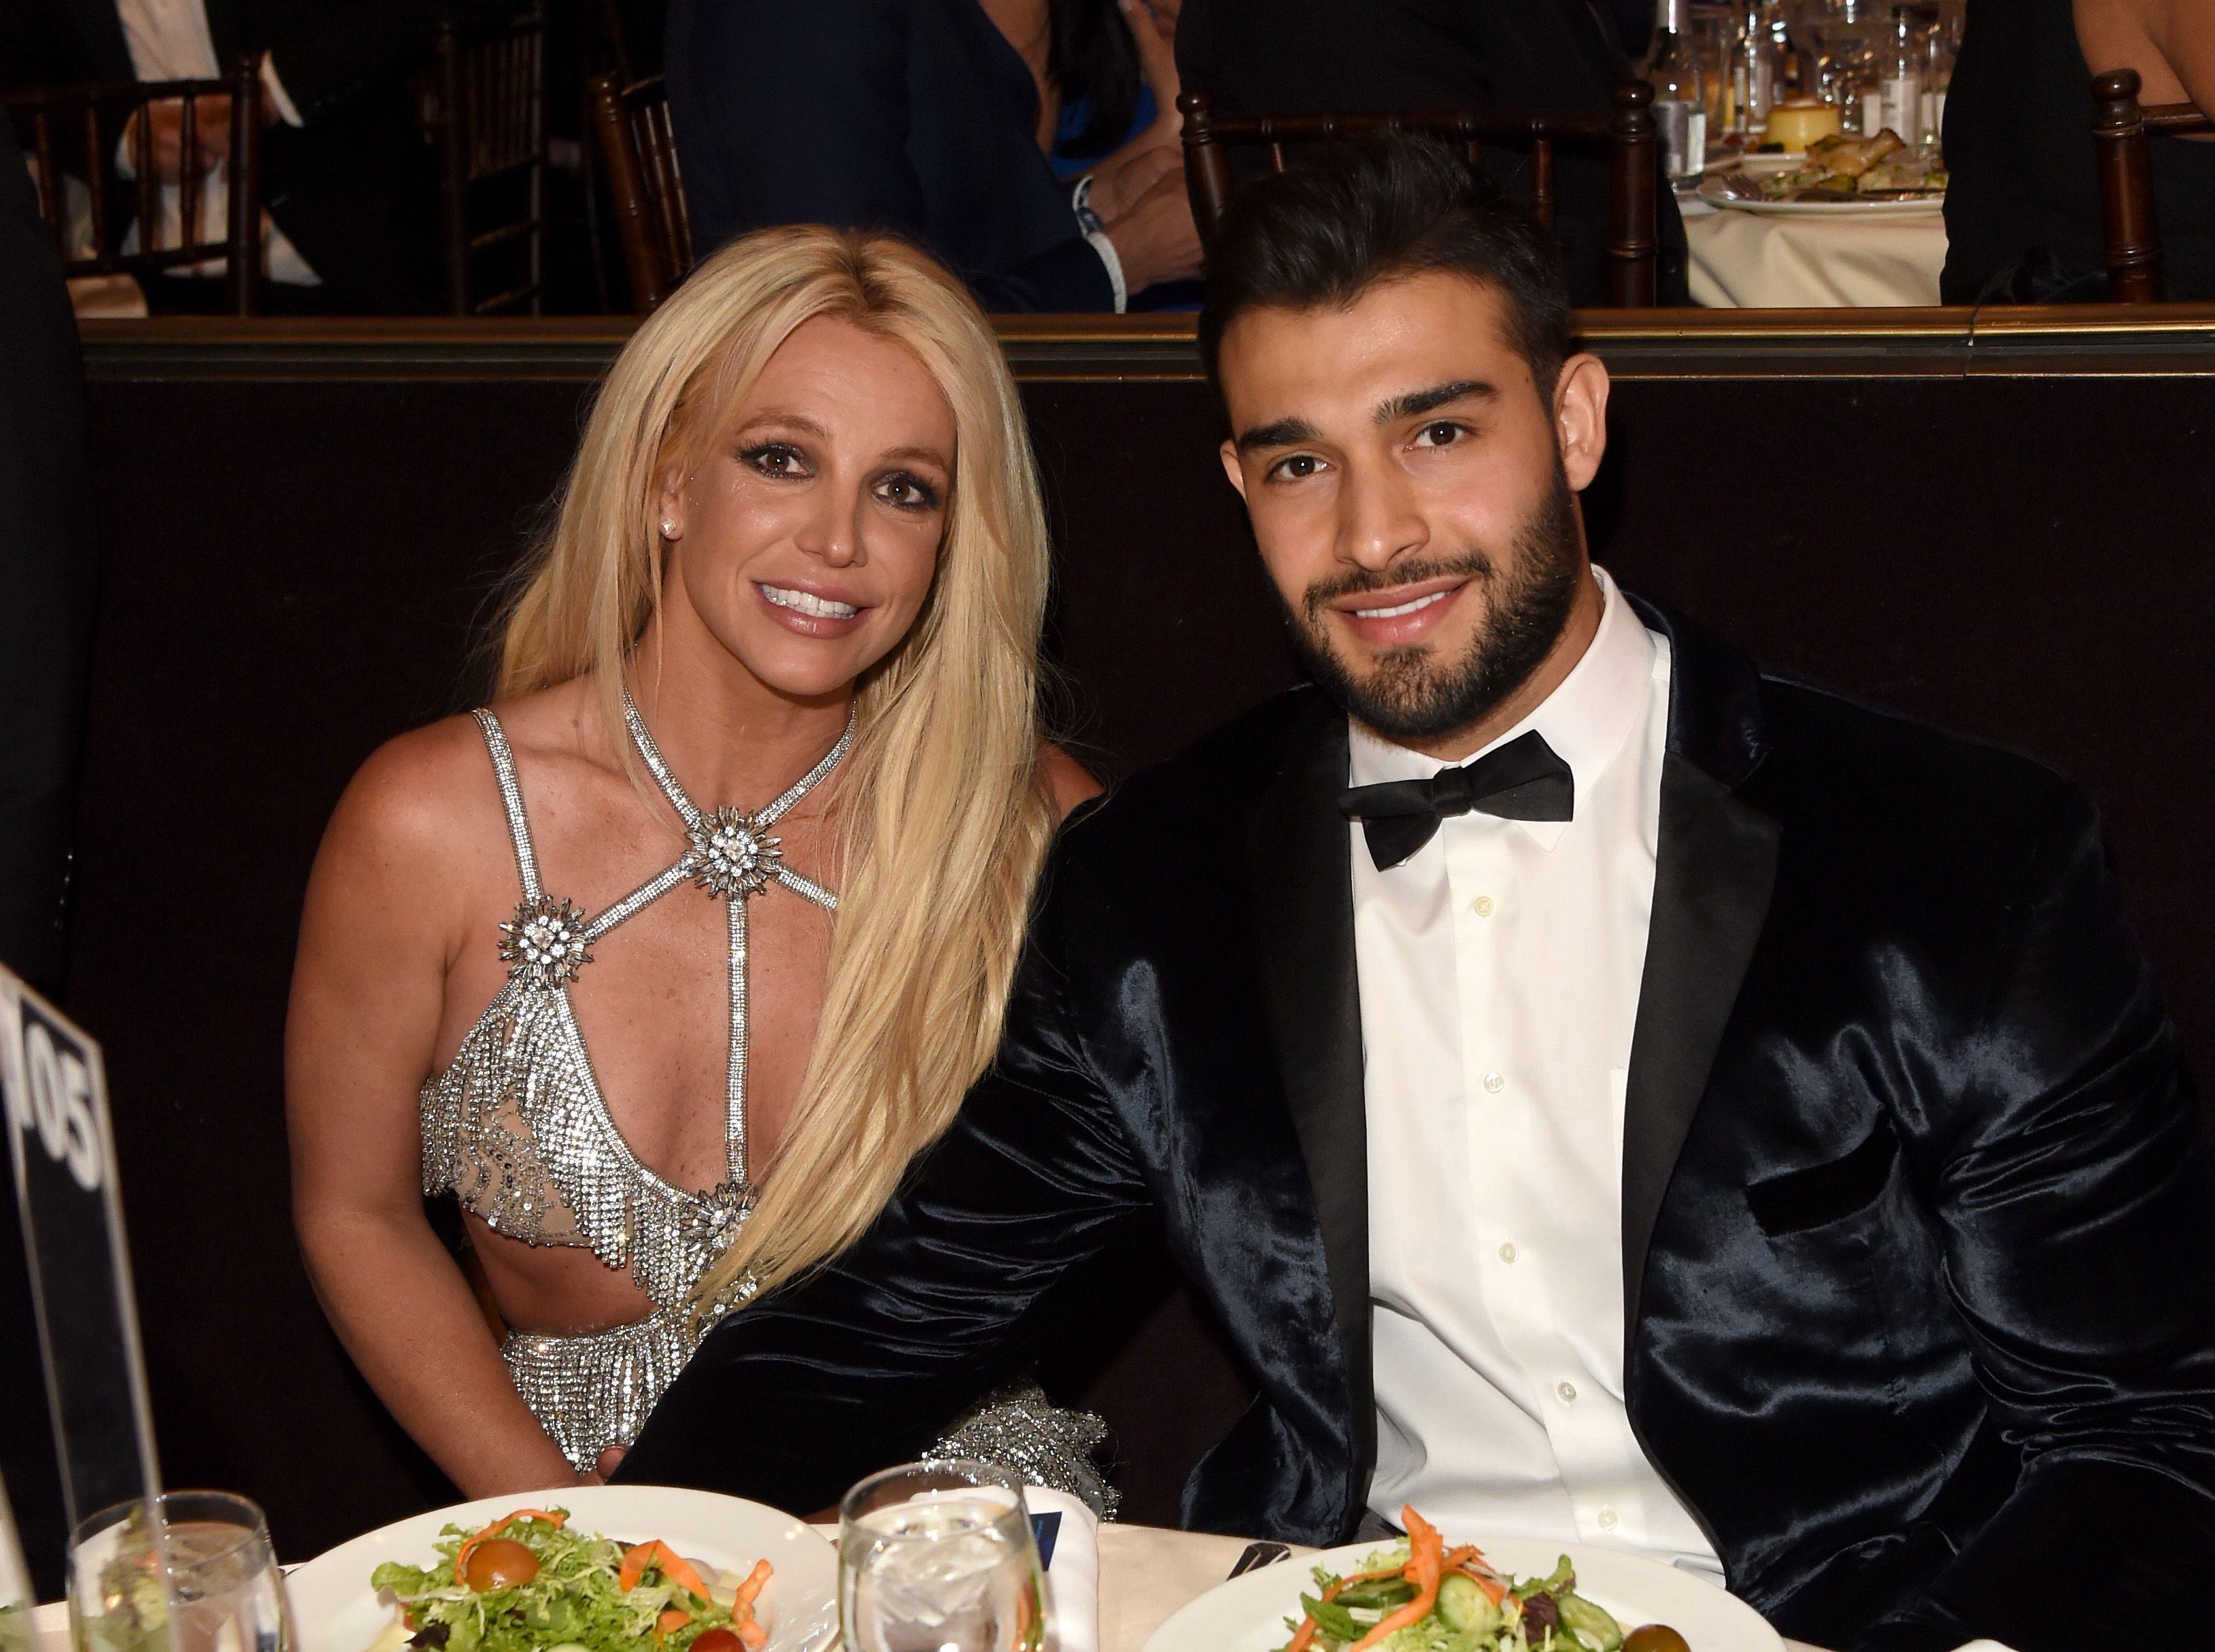 Britney Spears and Sam Asghari at the 29th Annual GLAAD Media Awards at The Beverly Hilton Hotel in Beverly Hills, California | Photo: J. Merritt/Getty Images for GLAAD